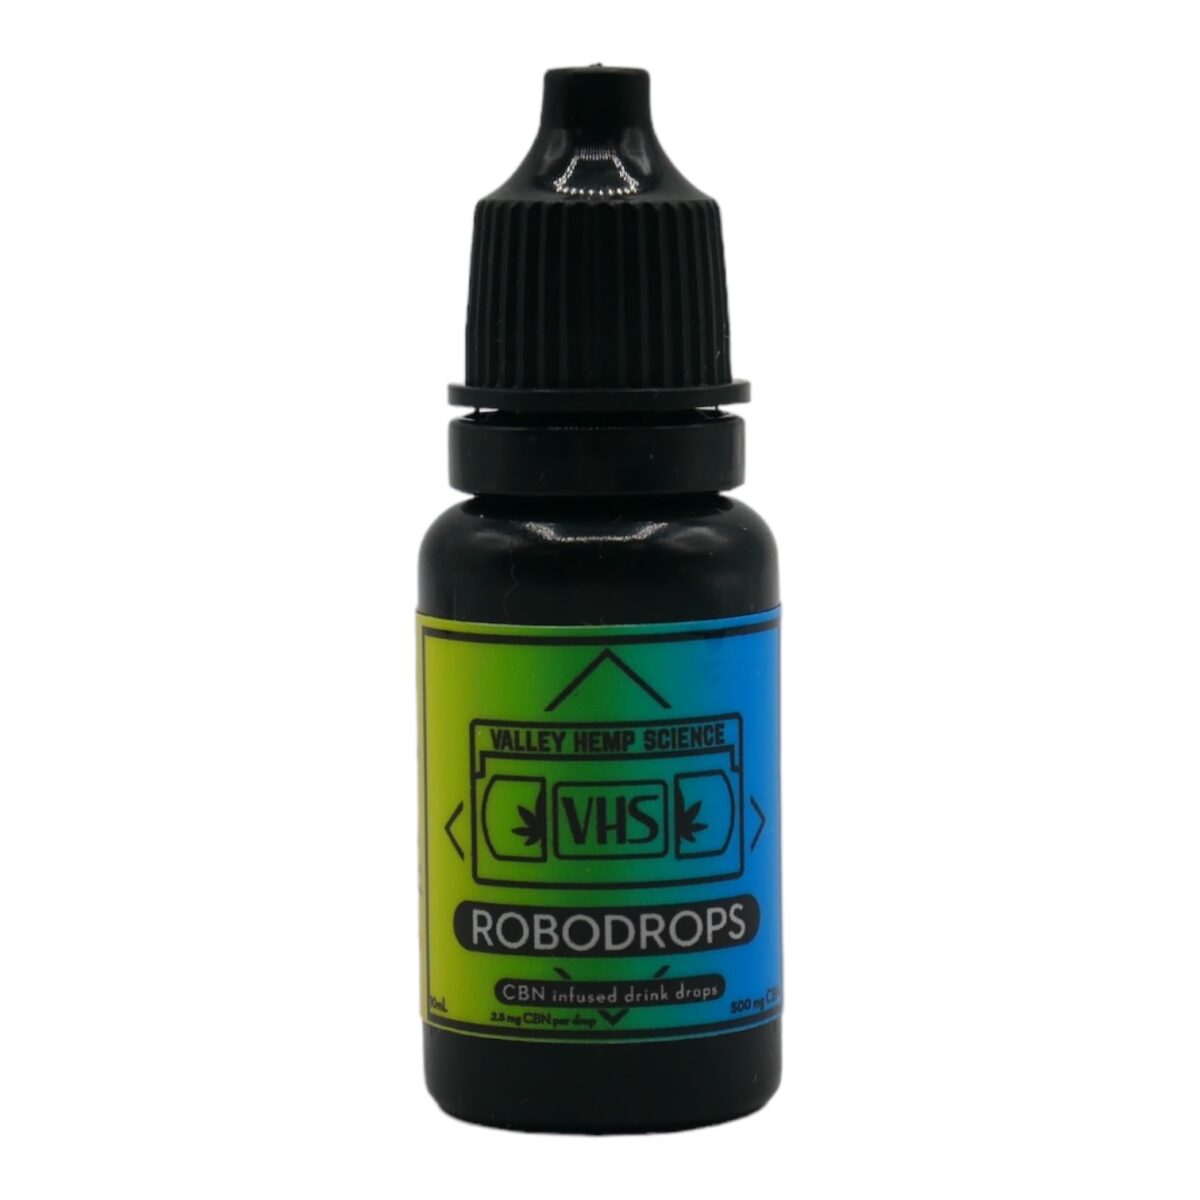 VHS RoboDrops CBN Infused Drink Drops